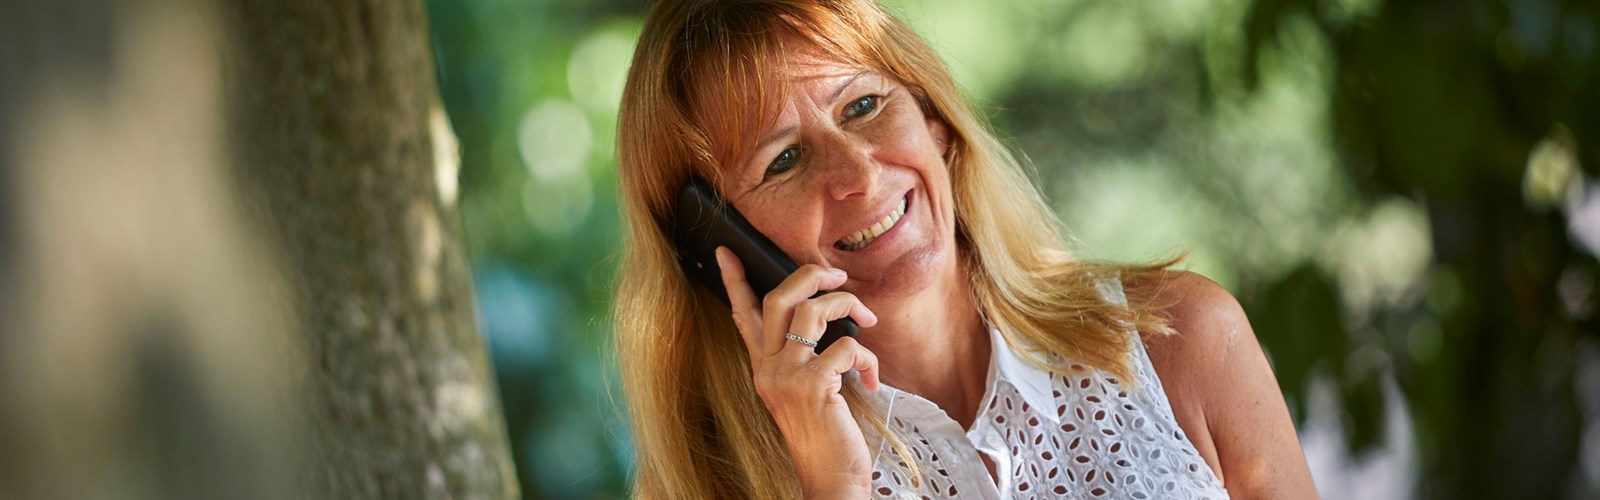 Happy woman stands in a park talking into a mobile phone